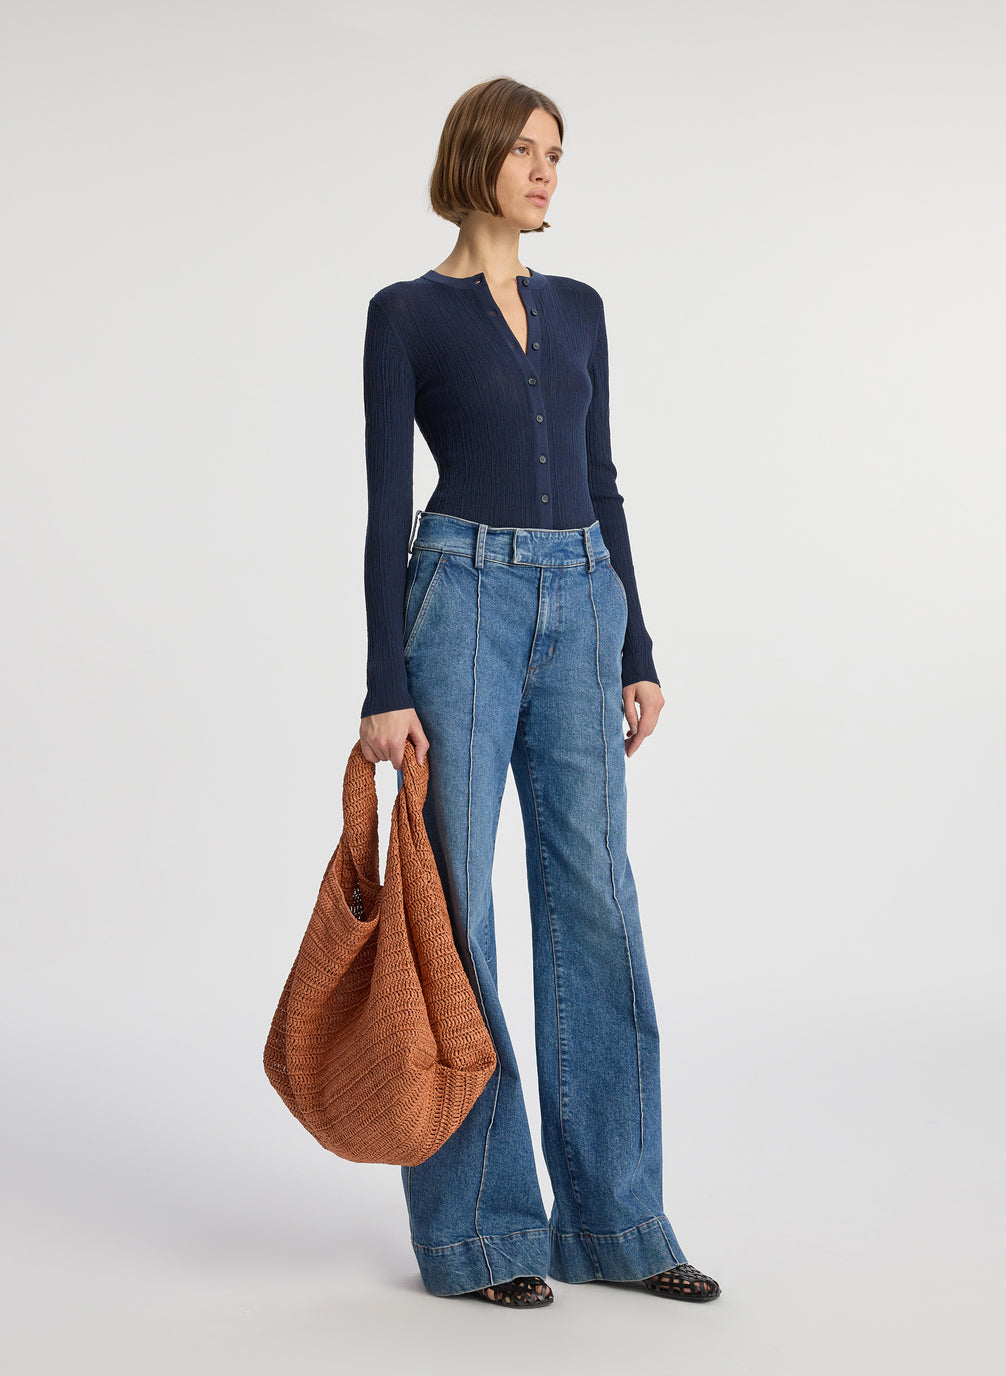 side view of woman wearing navy blue cardigan and medium blue wash wide leg denim jeans